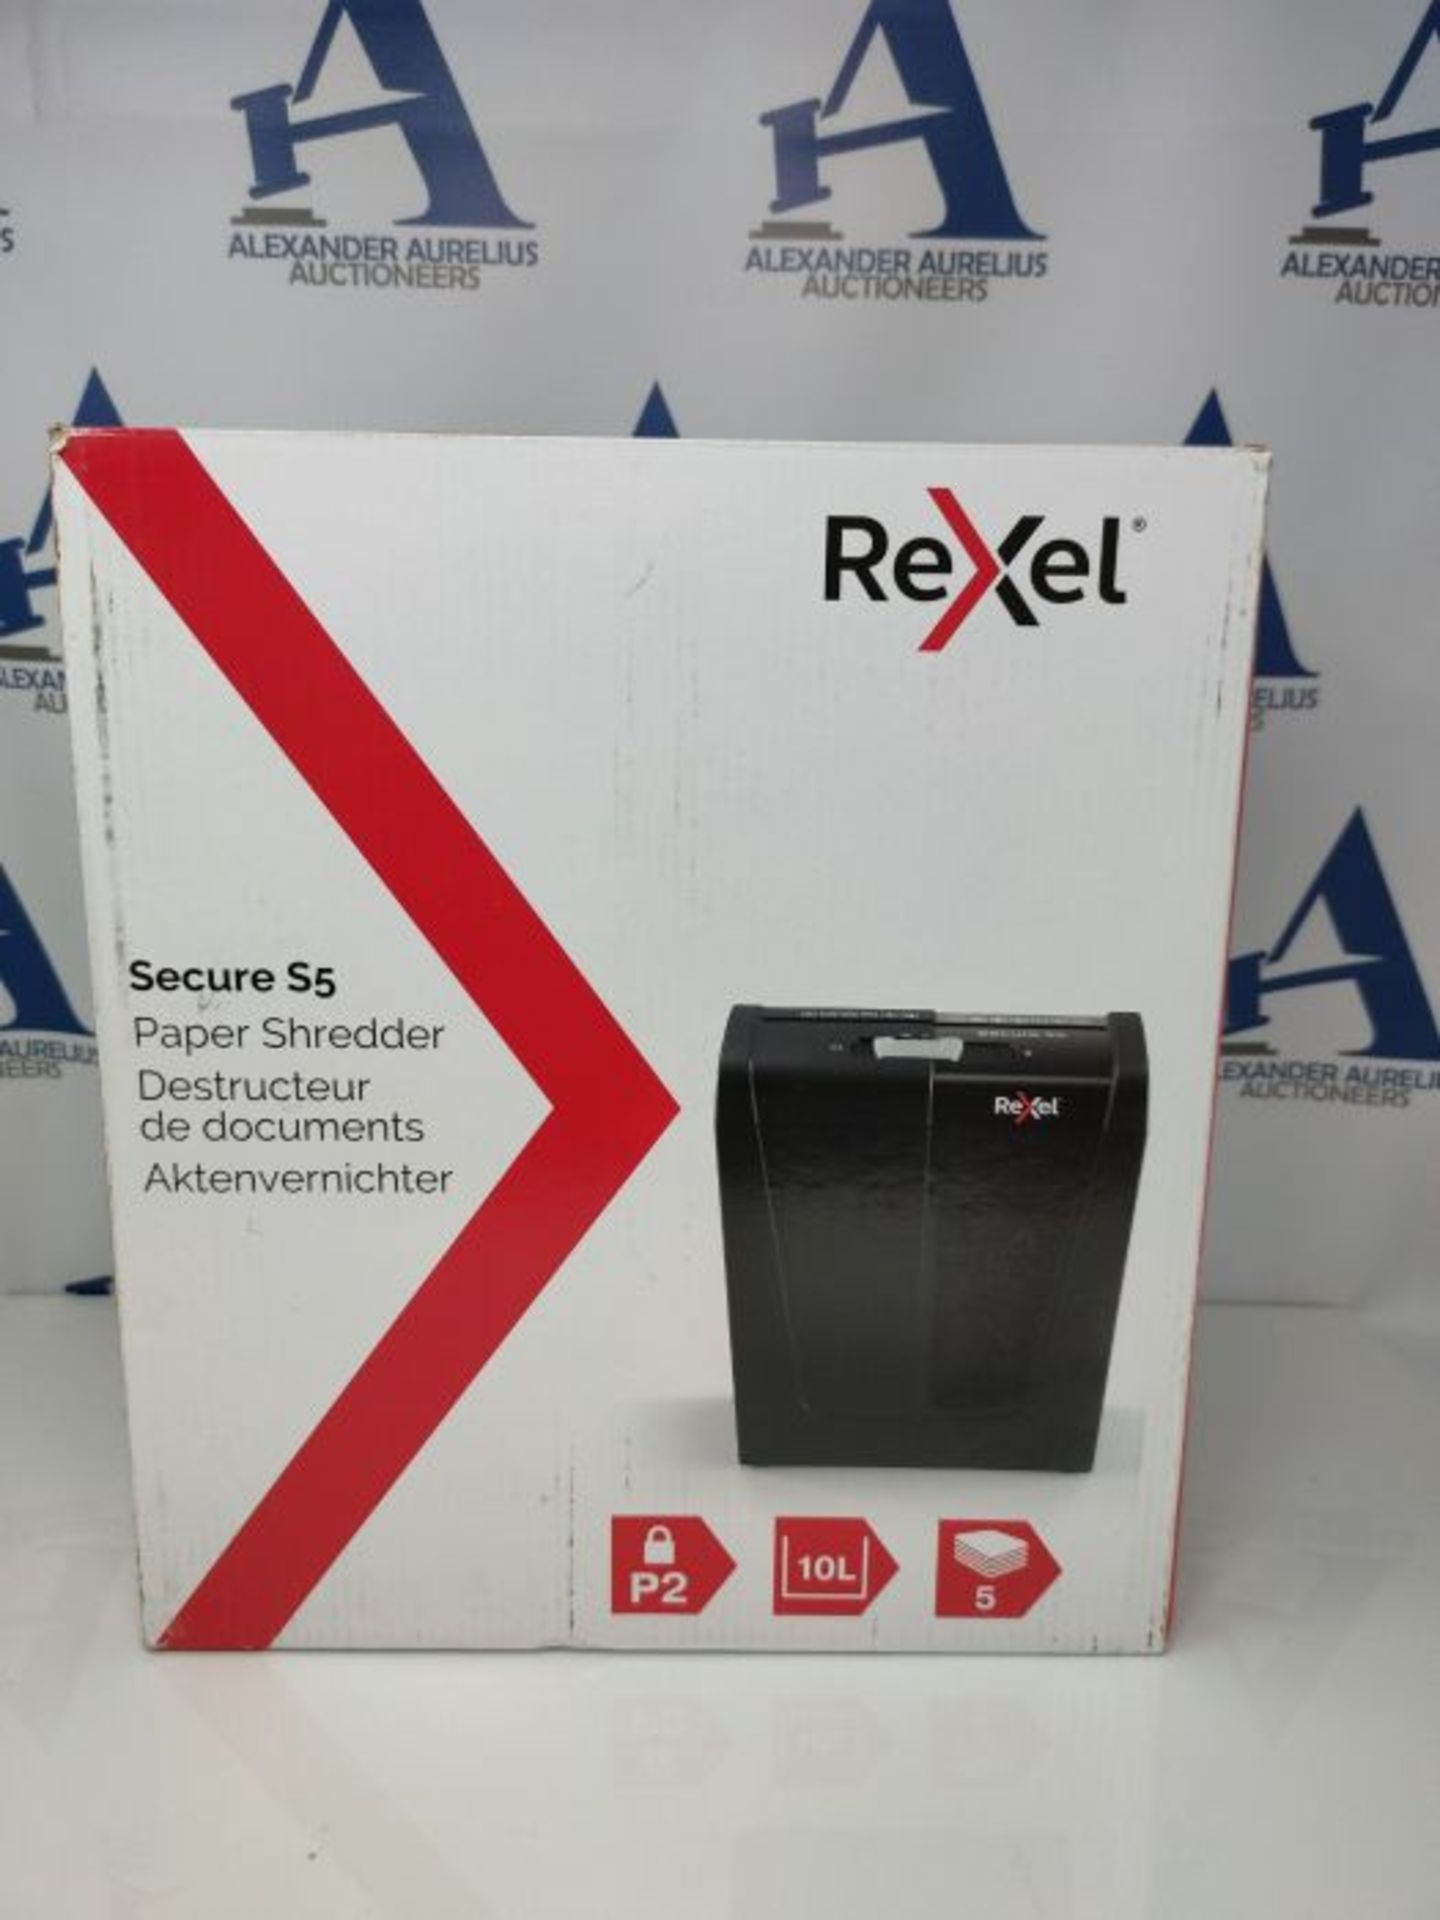 Rexel S5 Strip Cut Paper Shredder, Shreds 5 Sheets, P2 Security, Home/Home Office, 10 - Image 2 of 3